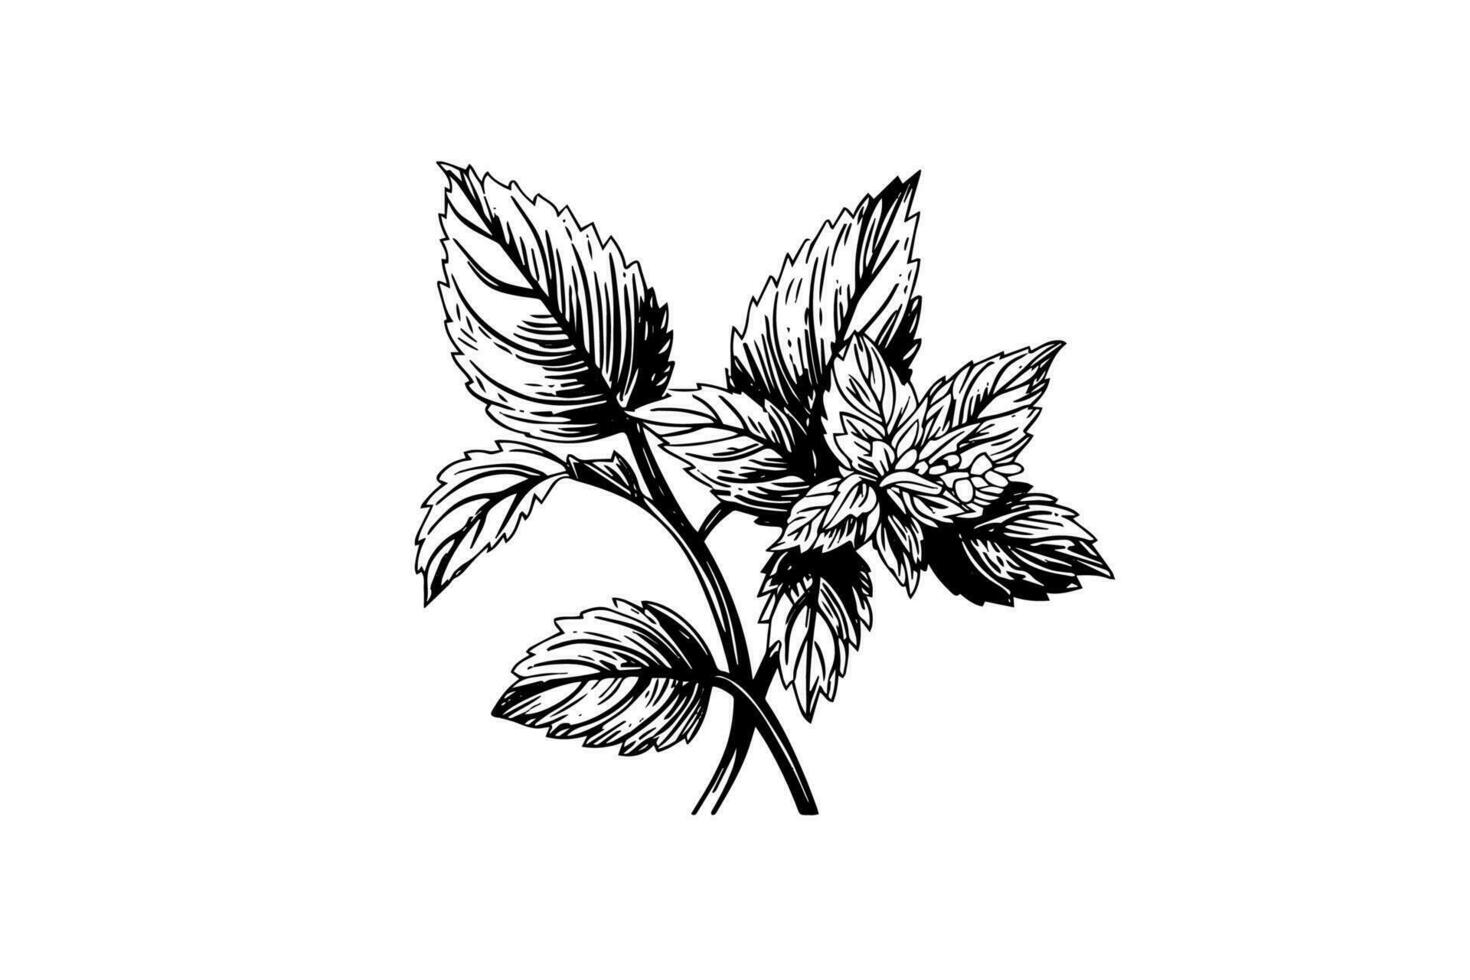 Peppermint sketch. Mint leaves branches and flowers engraving style vector illustration